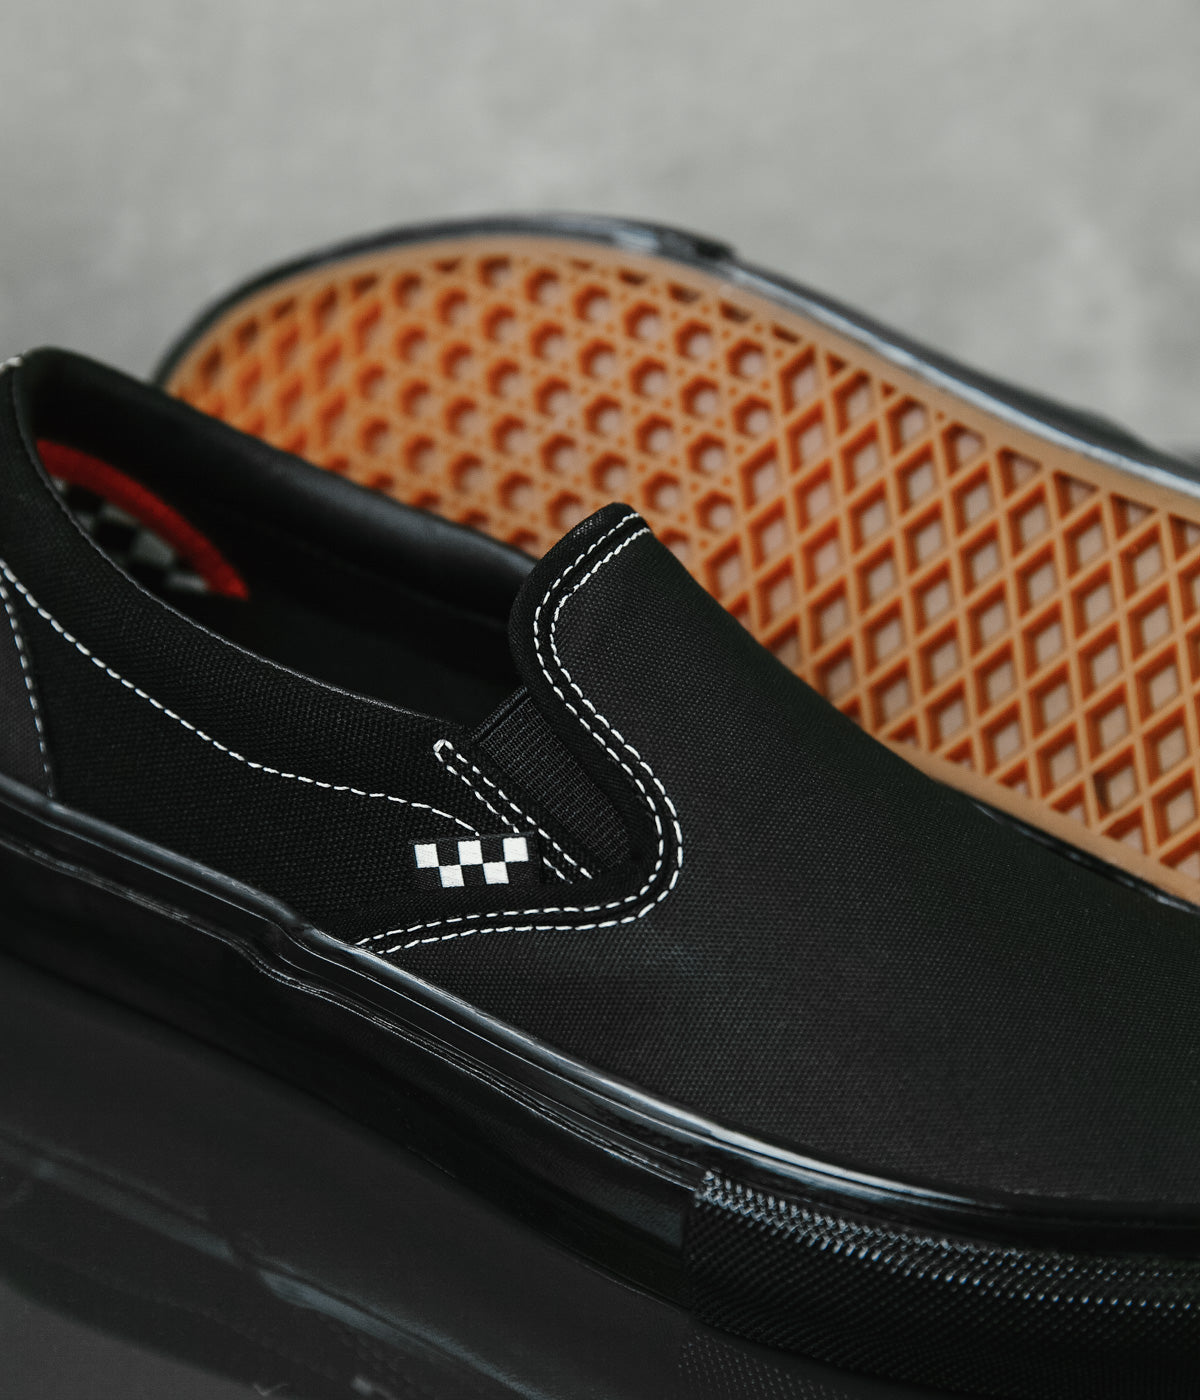 leather slip on skate shoes